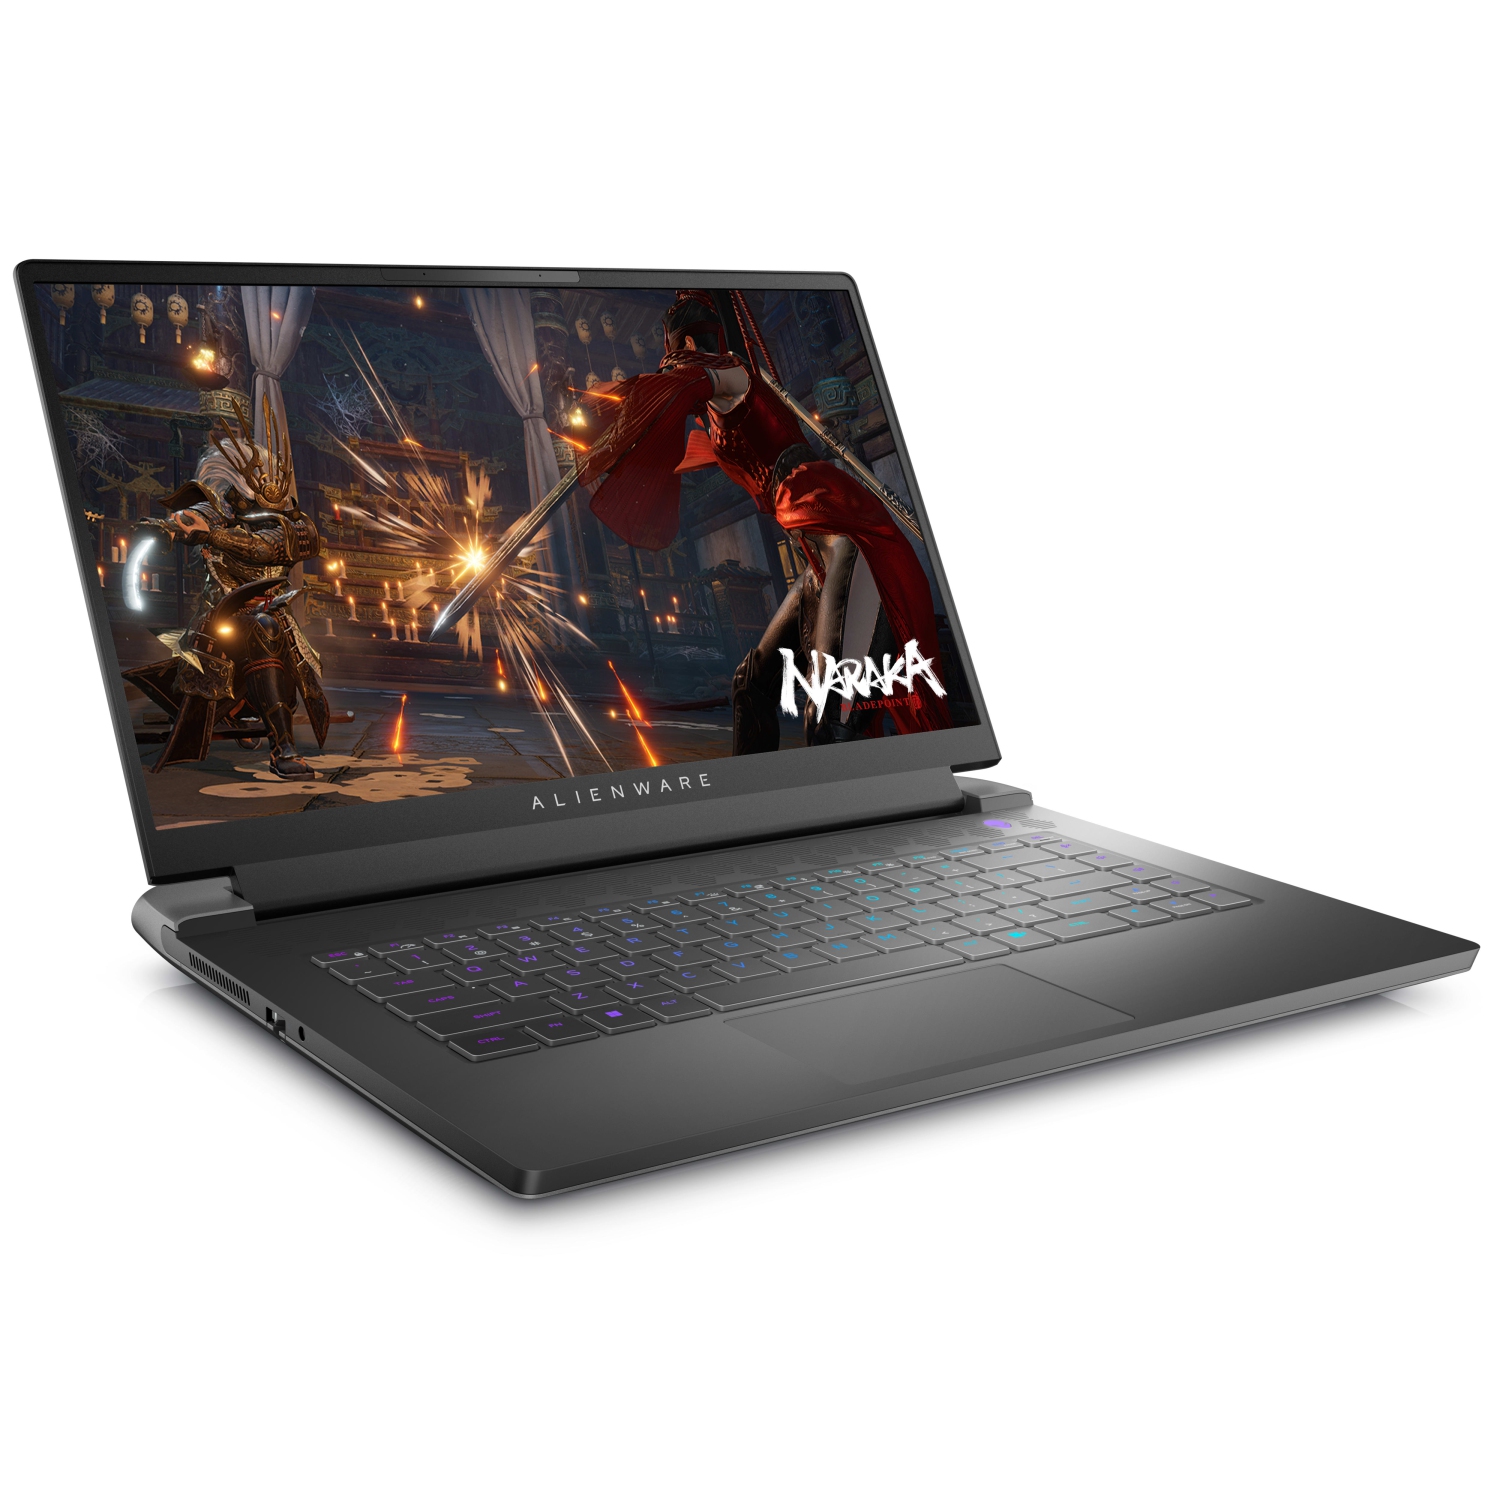 Refurbished (Excellent) – Dell Alienware m15 R7 Gaming Laptop (2022) | 15.6" FHD | Core i7 - 2TB SSD - 64GB RAM - 3070 Ti | 14 Cores @ 4.7 GHz - 12th Gen CPU - 8GB GDDR6X